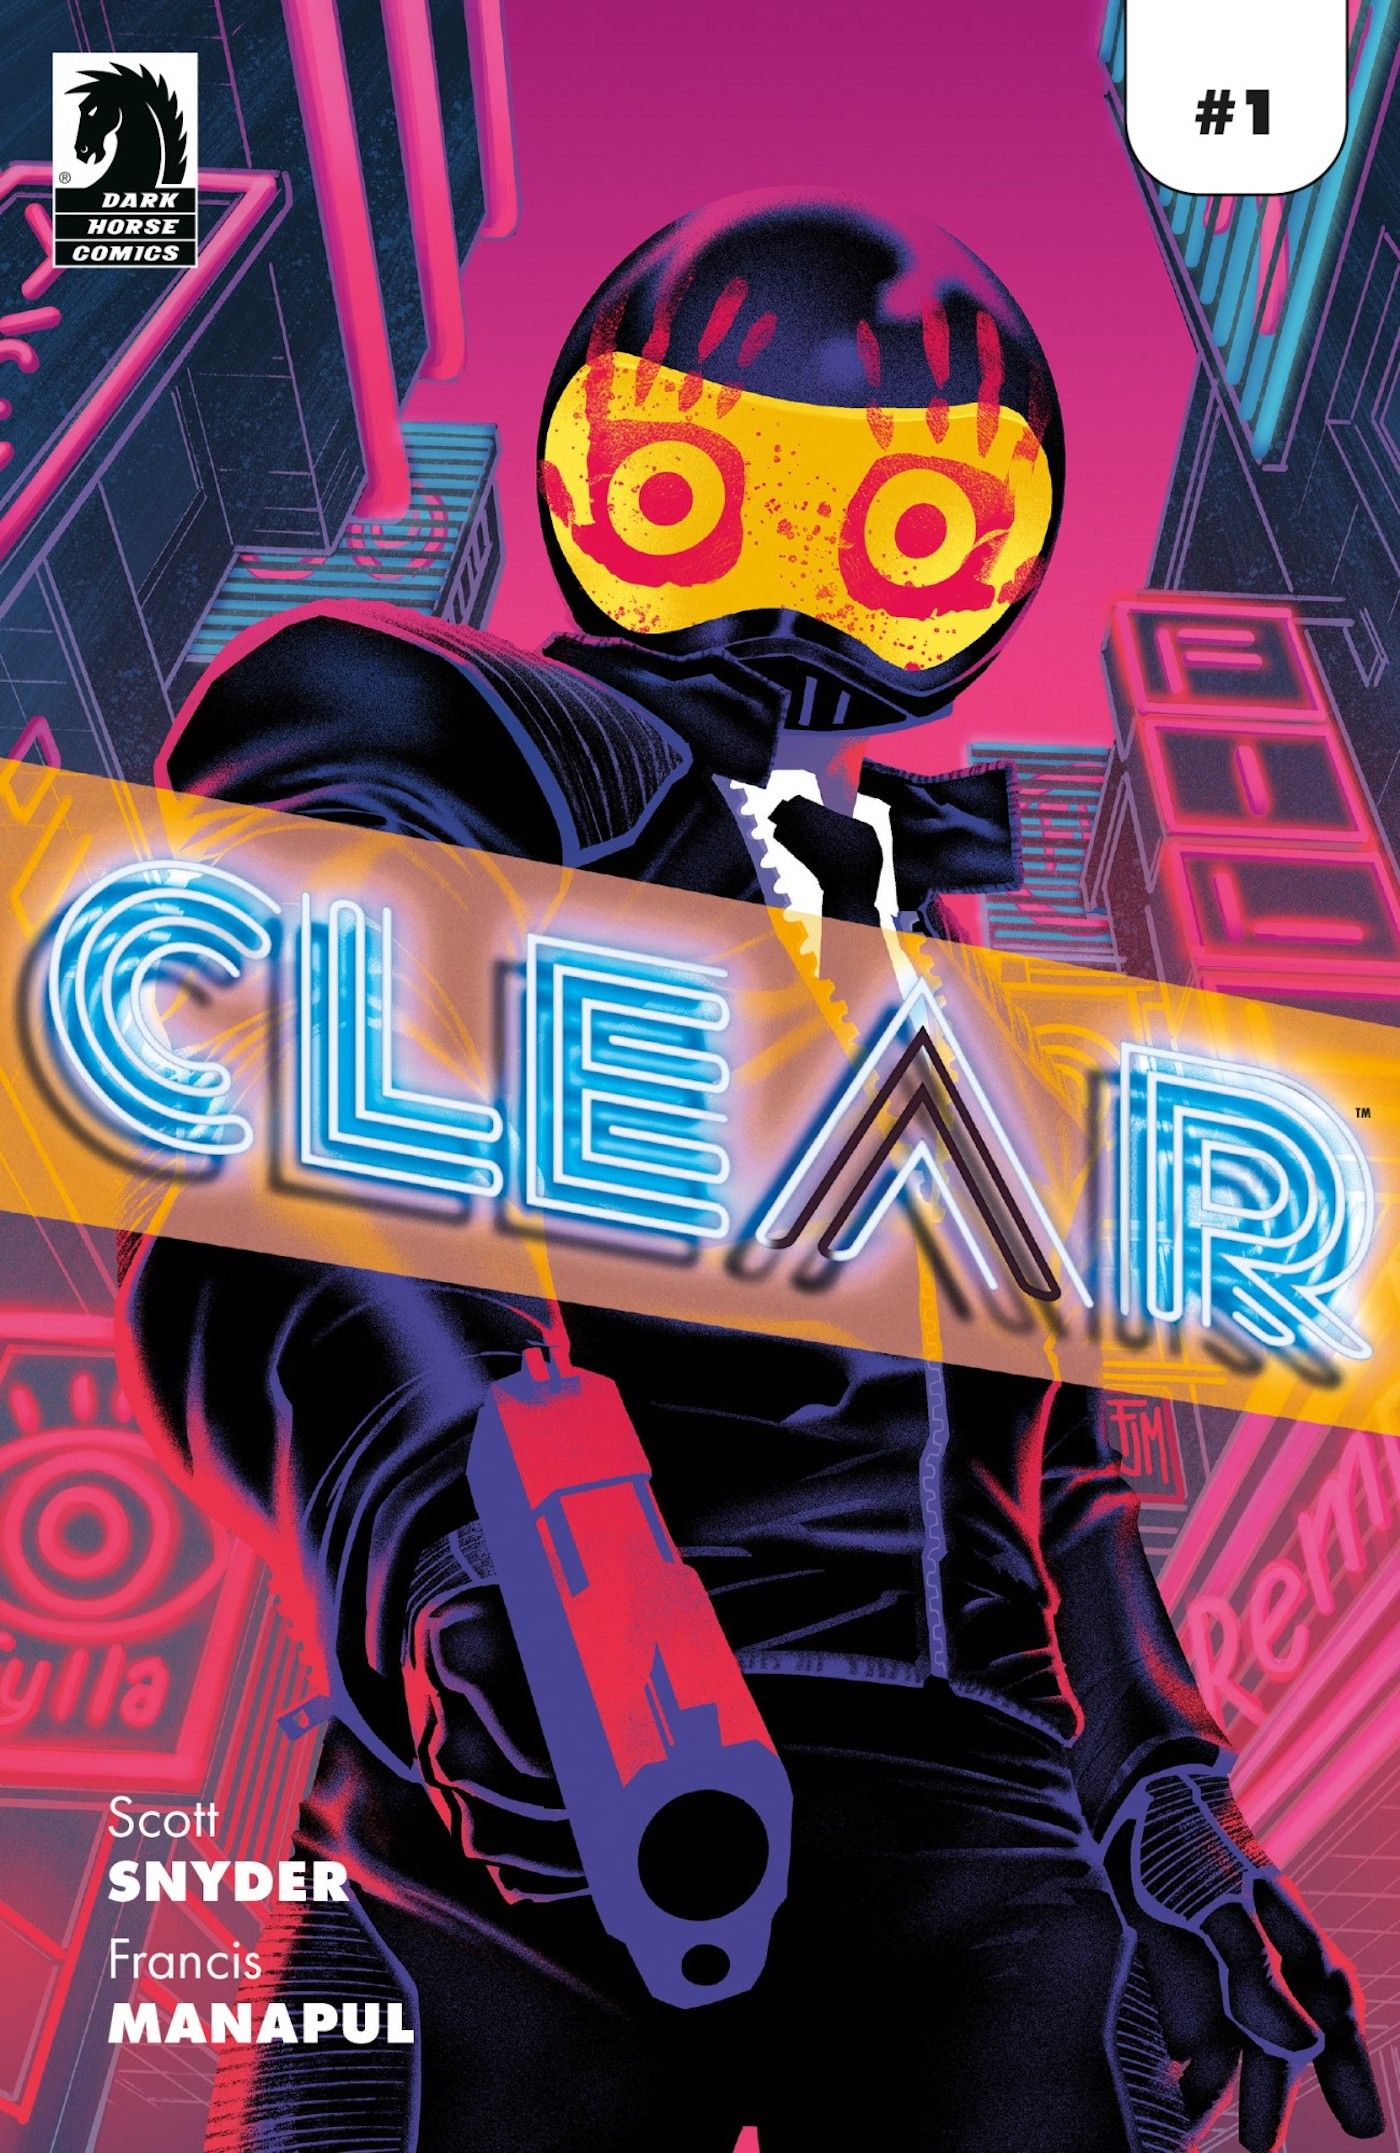 EXCLUSIVE: ComiXology's CLEAR Gets New Print Release From Dark Horse